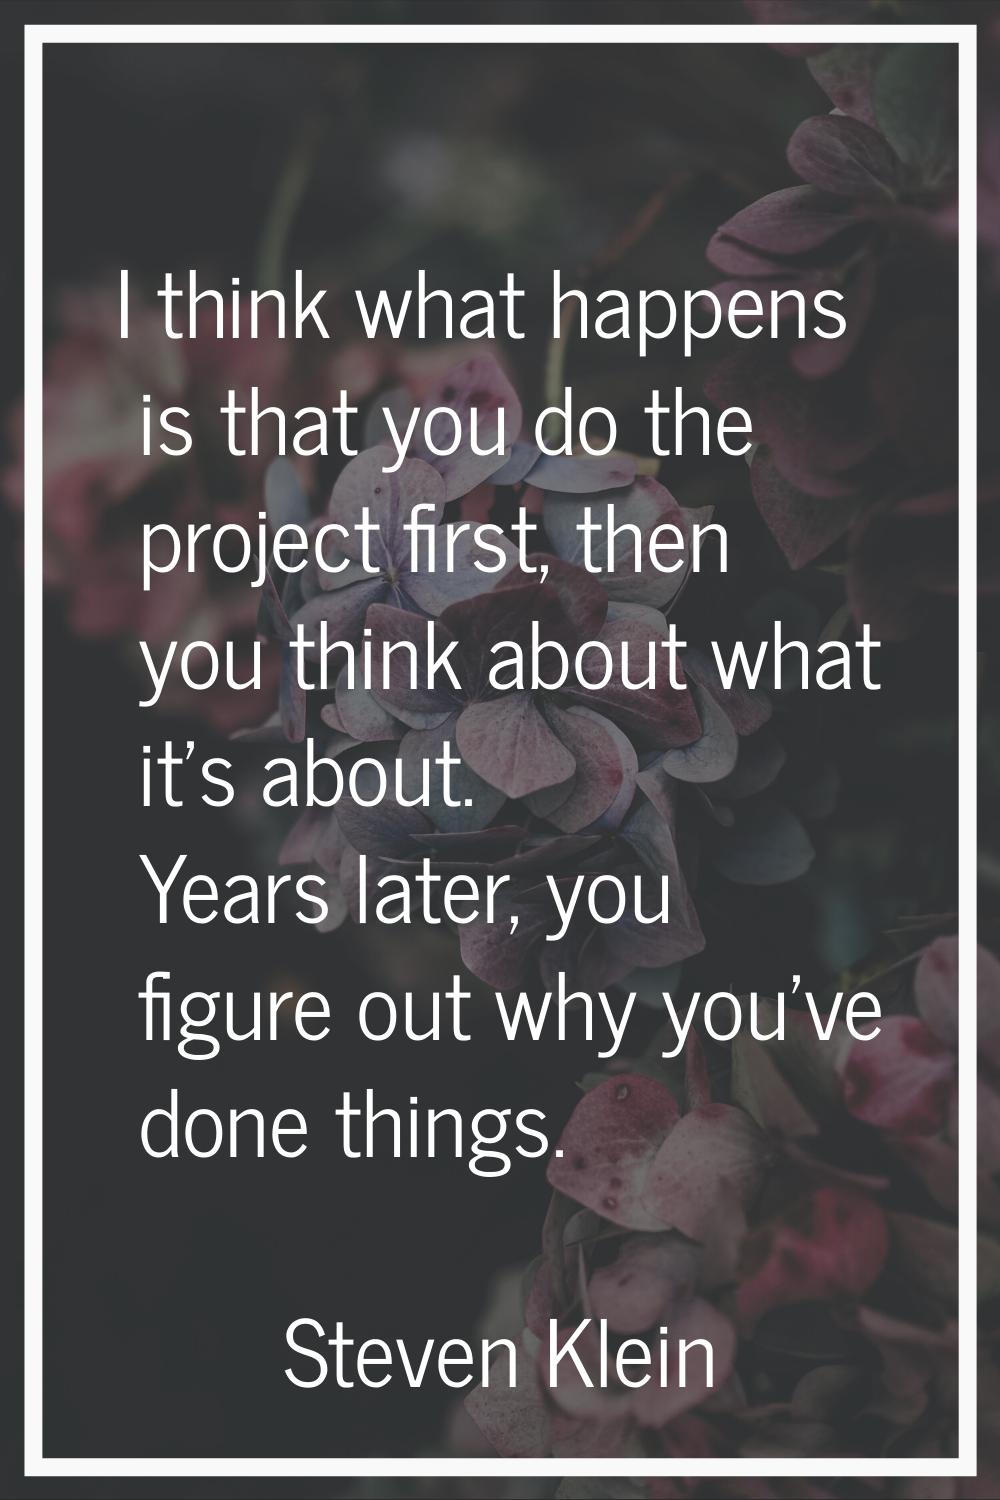 I think what happens is that you do the project first, then you think about what it's about. Years 